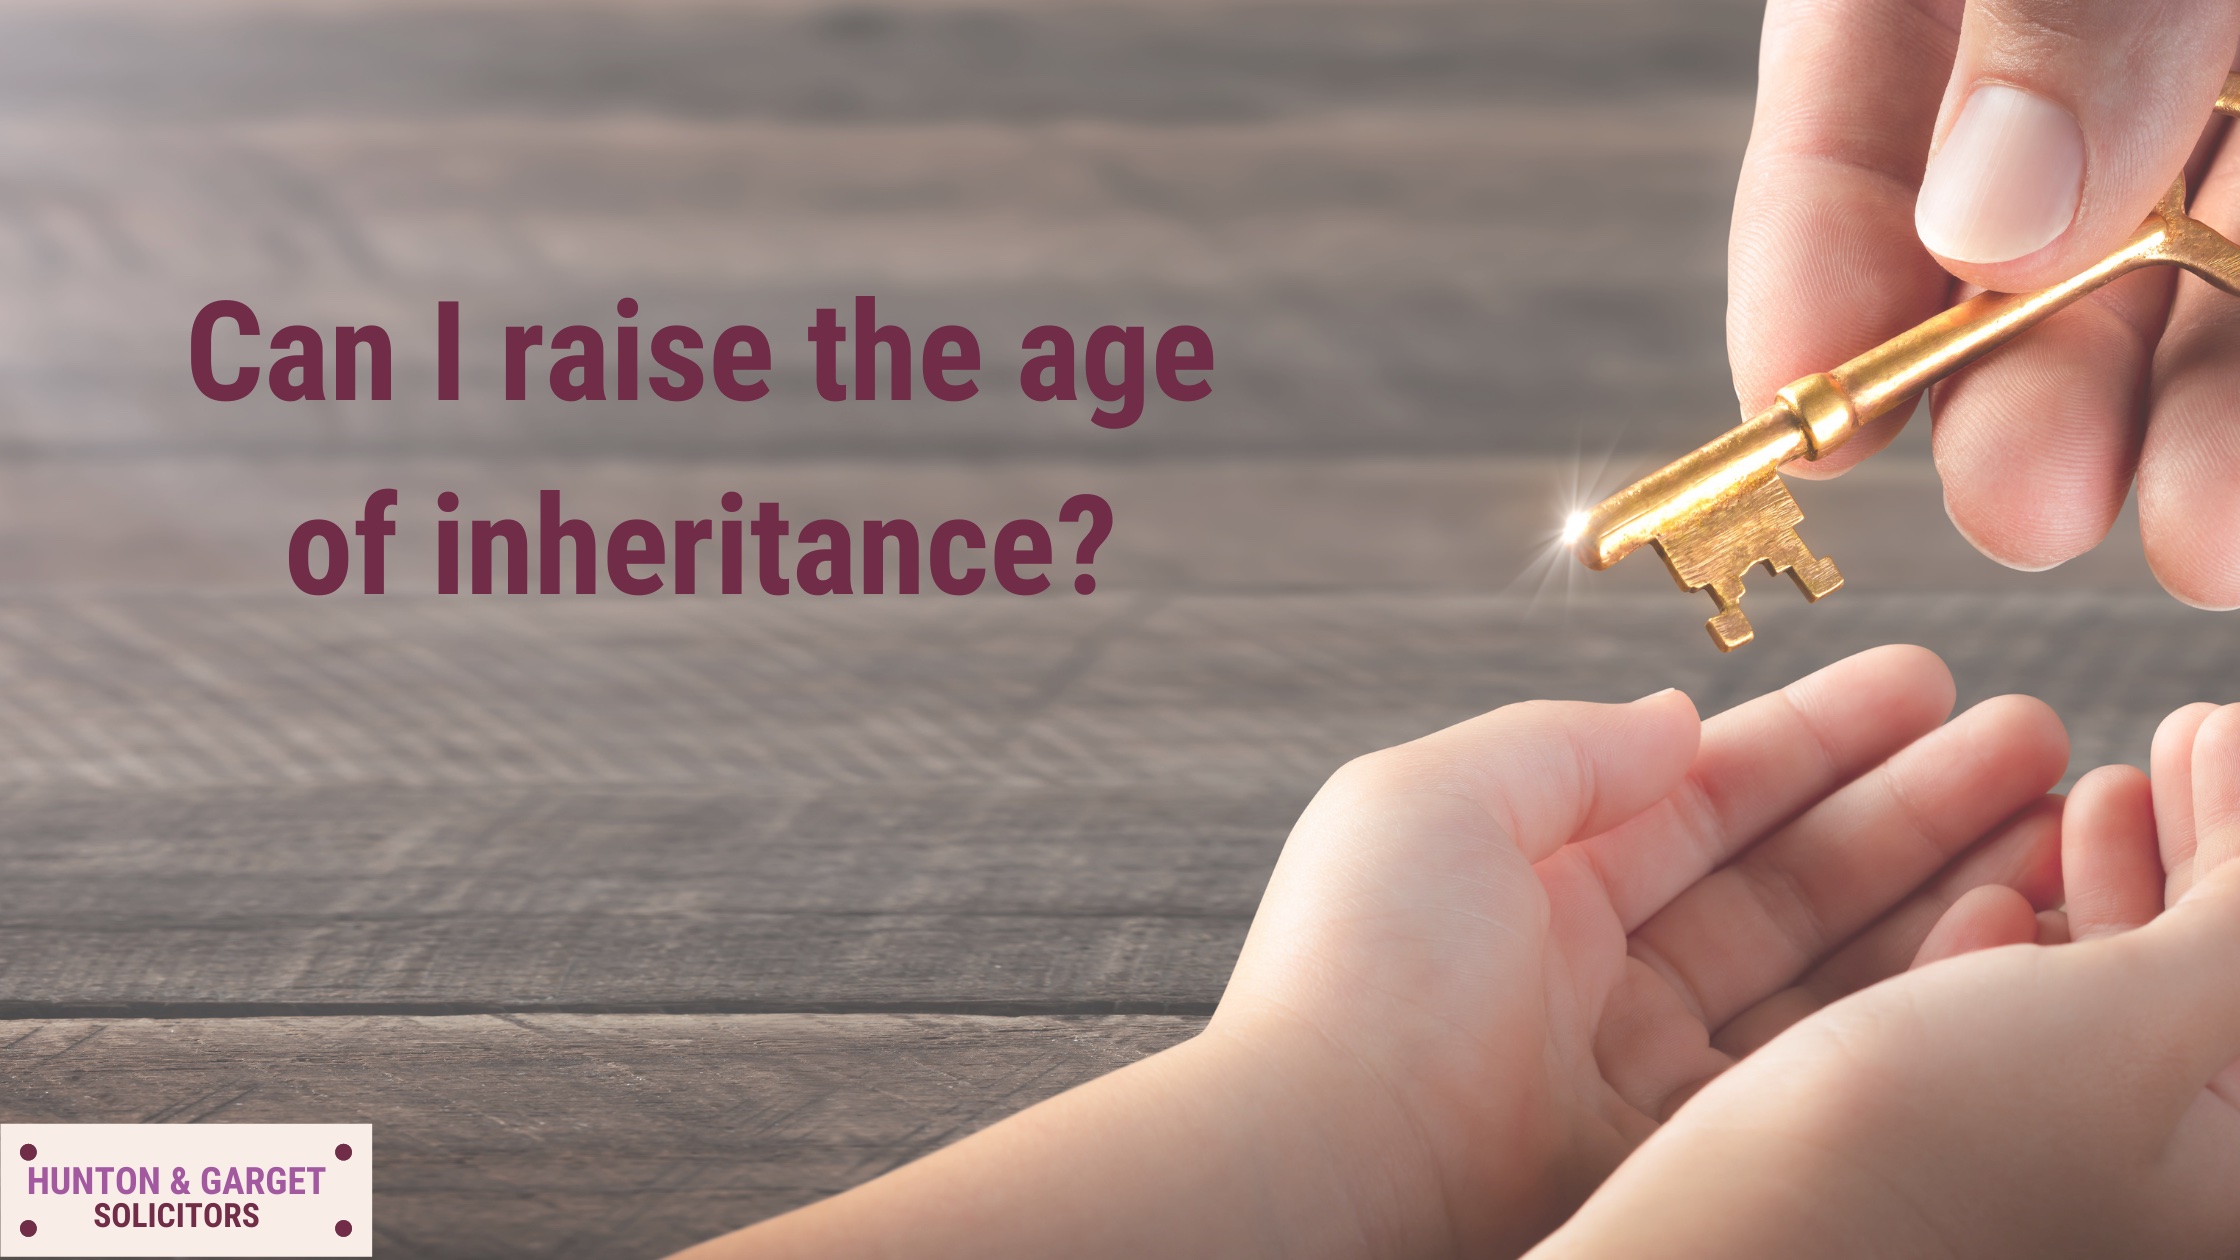 Graphic showing the question Can I raise the age of inheritance?